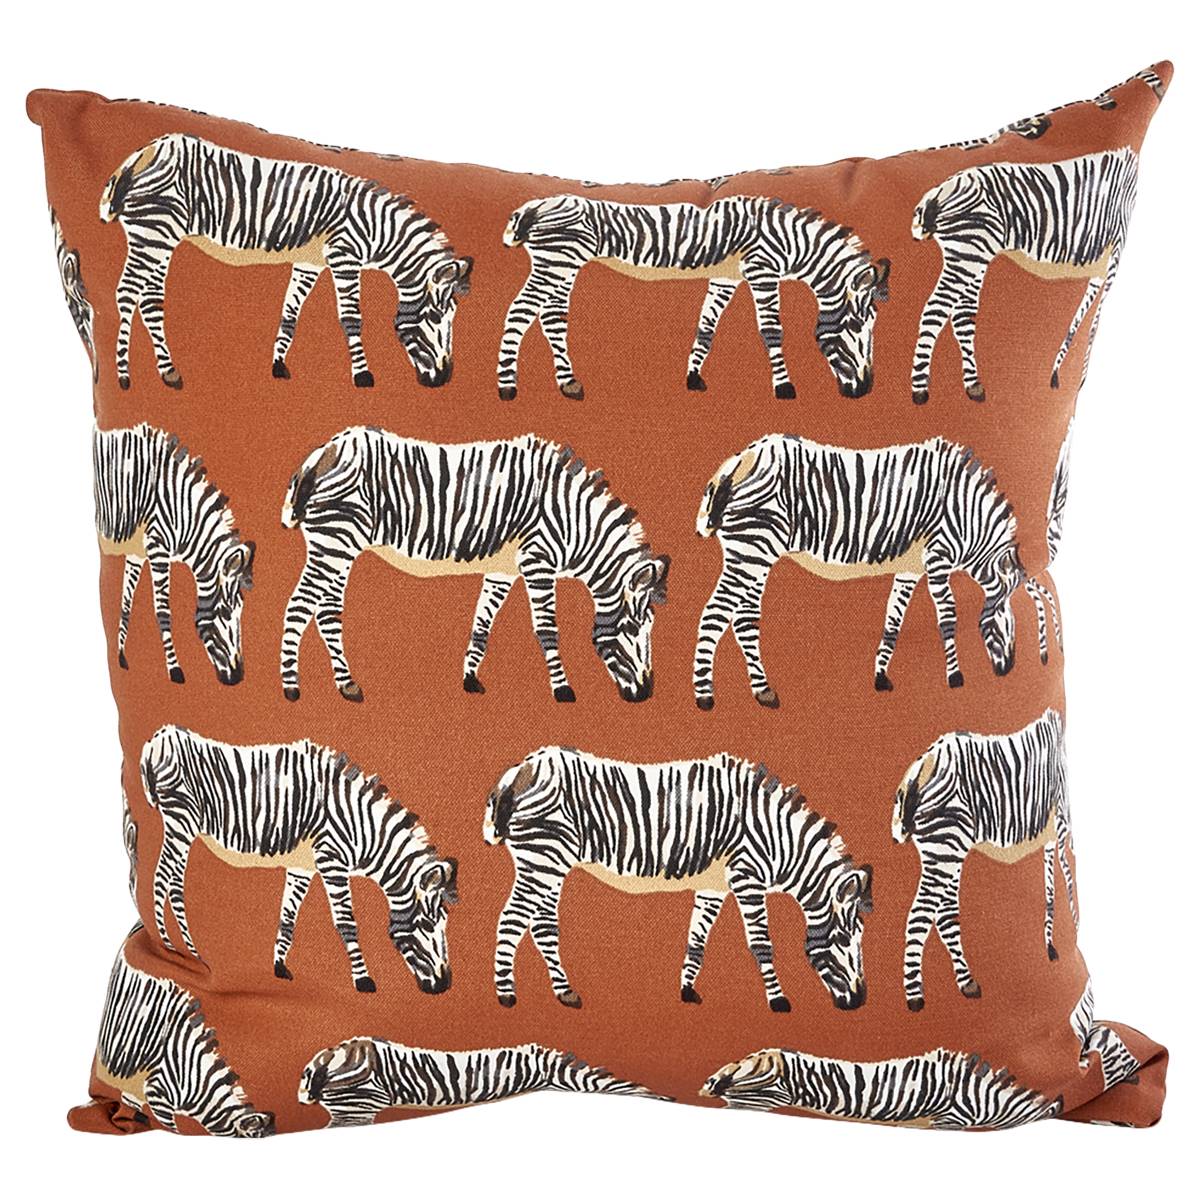 Hampton Bay March Of Zebra Russet Square Outdoor Throw Pillow